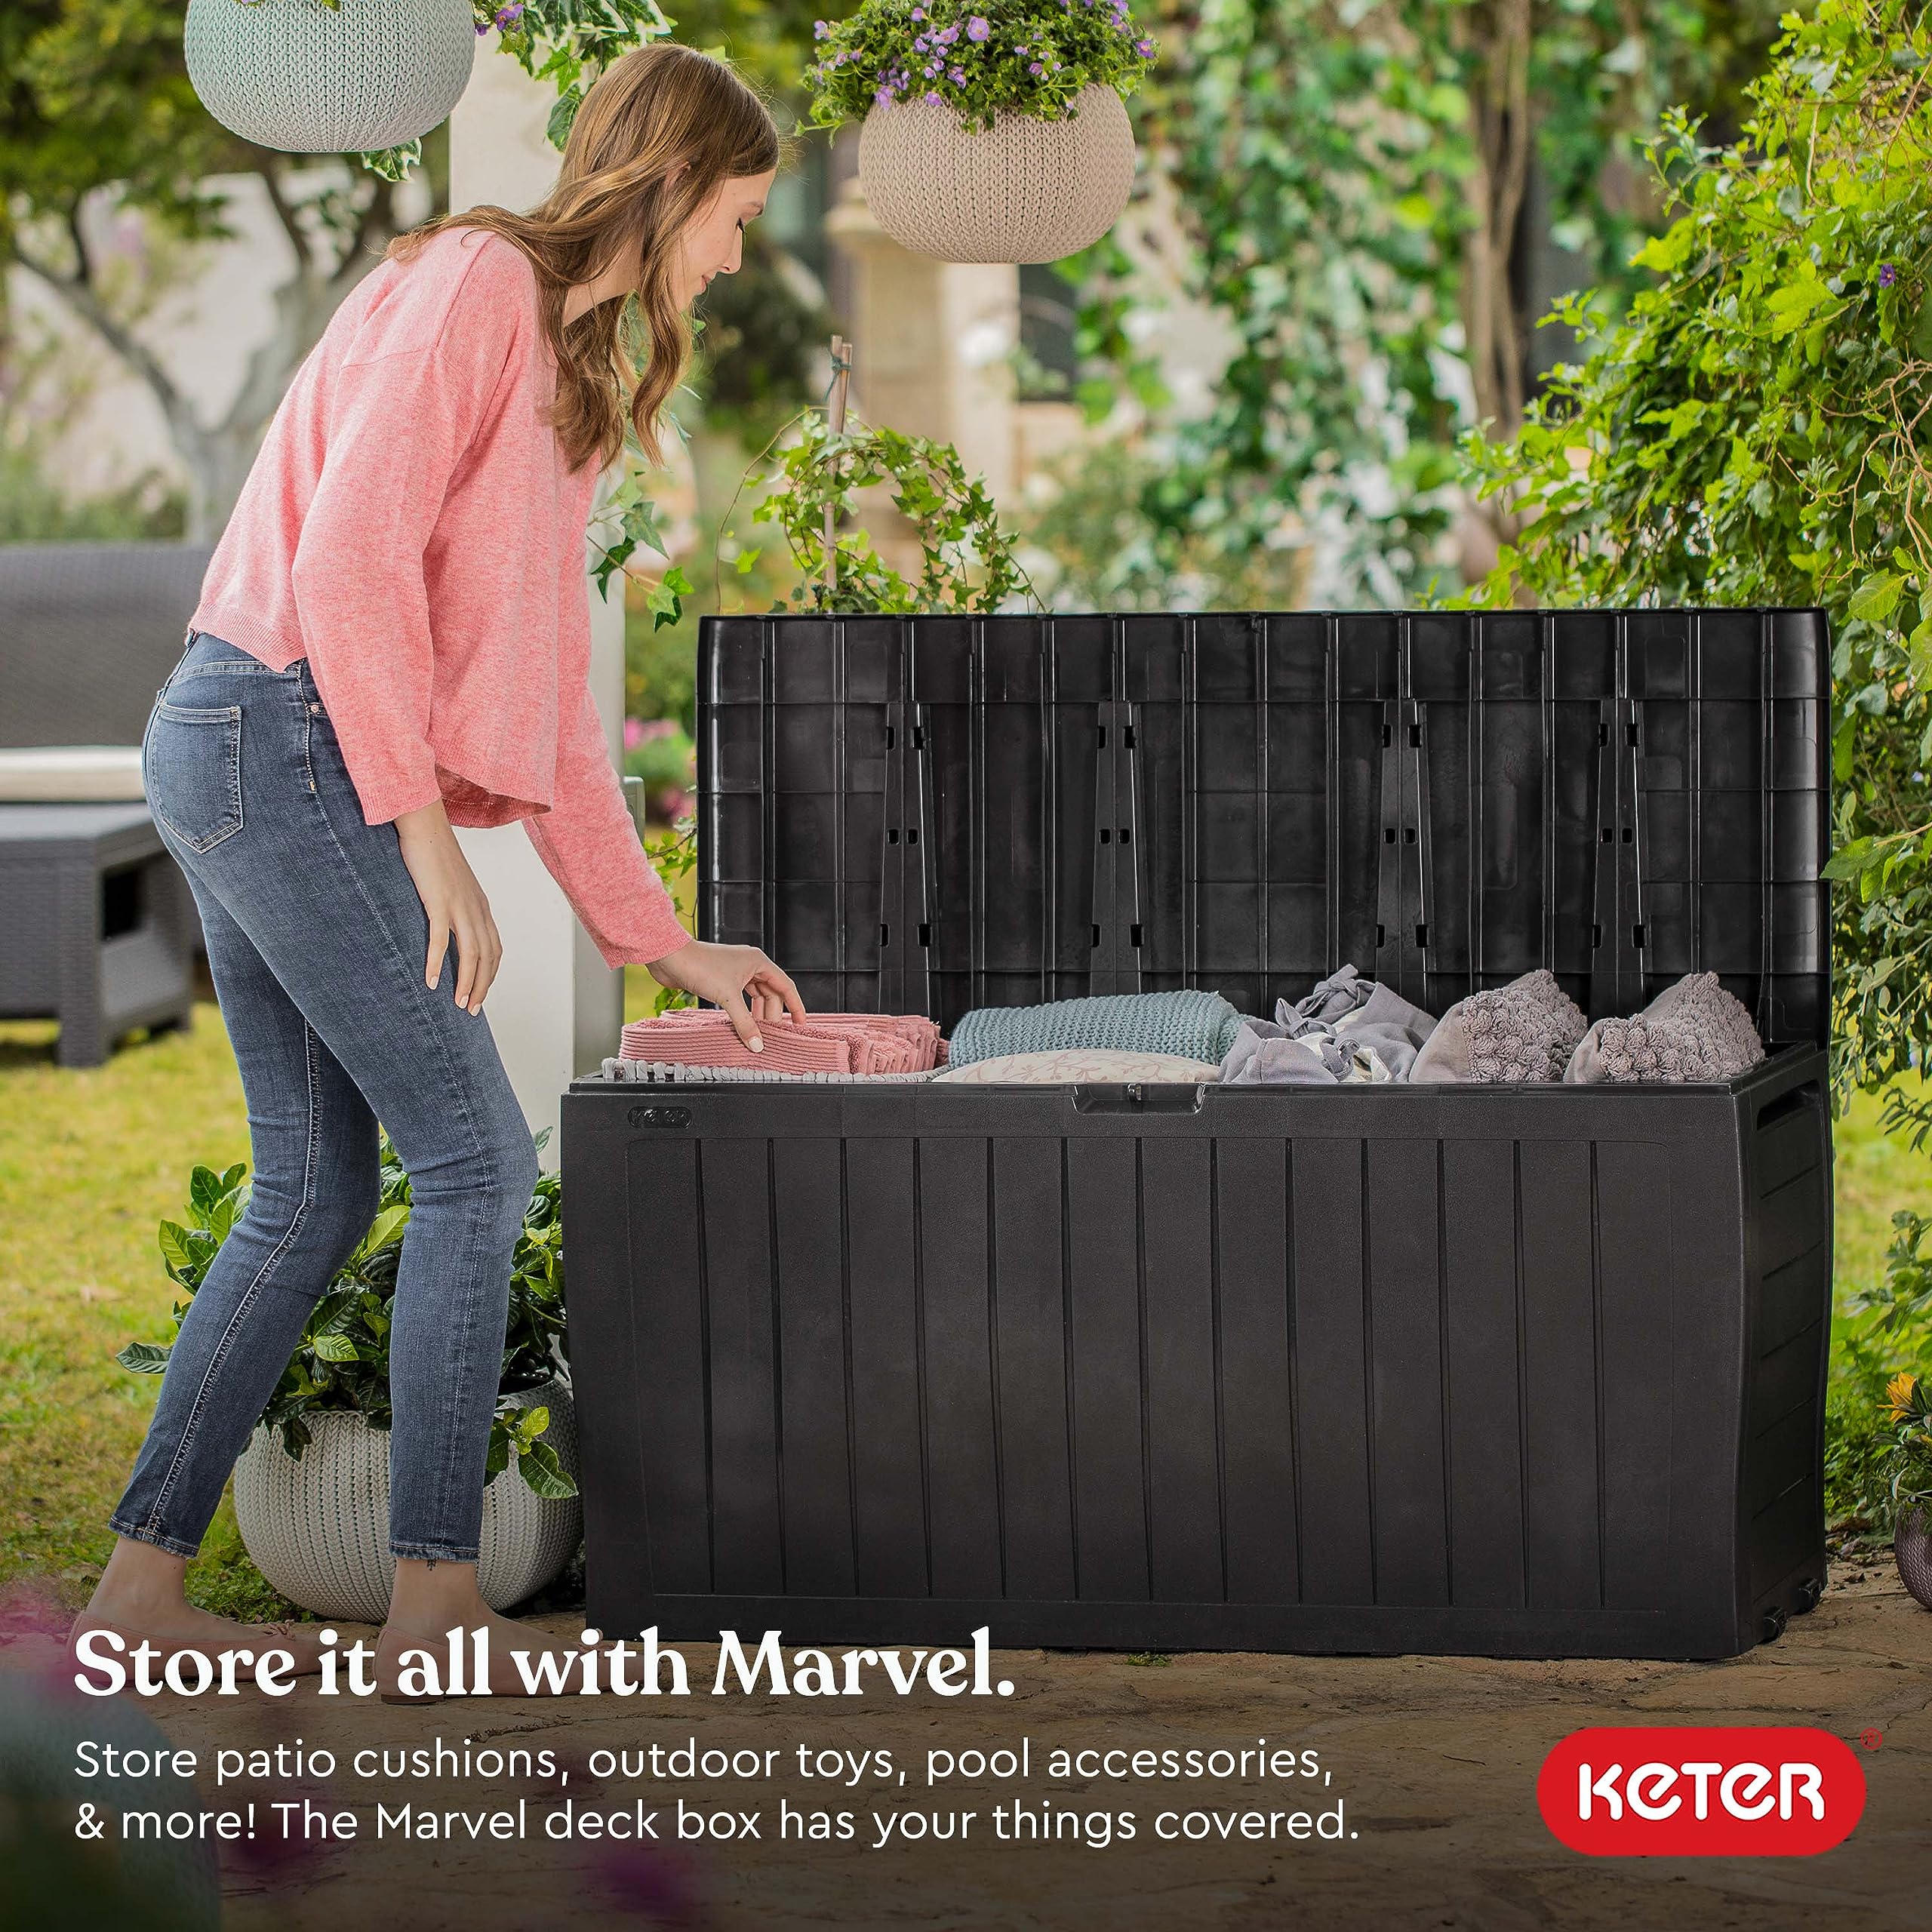 Keter Marvel Plus 71 Gallon Resin Deck Box-Organization and Storage for Patio Furniture Outdoor Cushions, Throw Pillows, Garden 